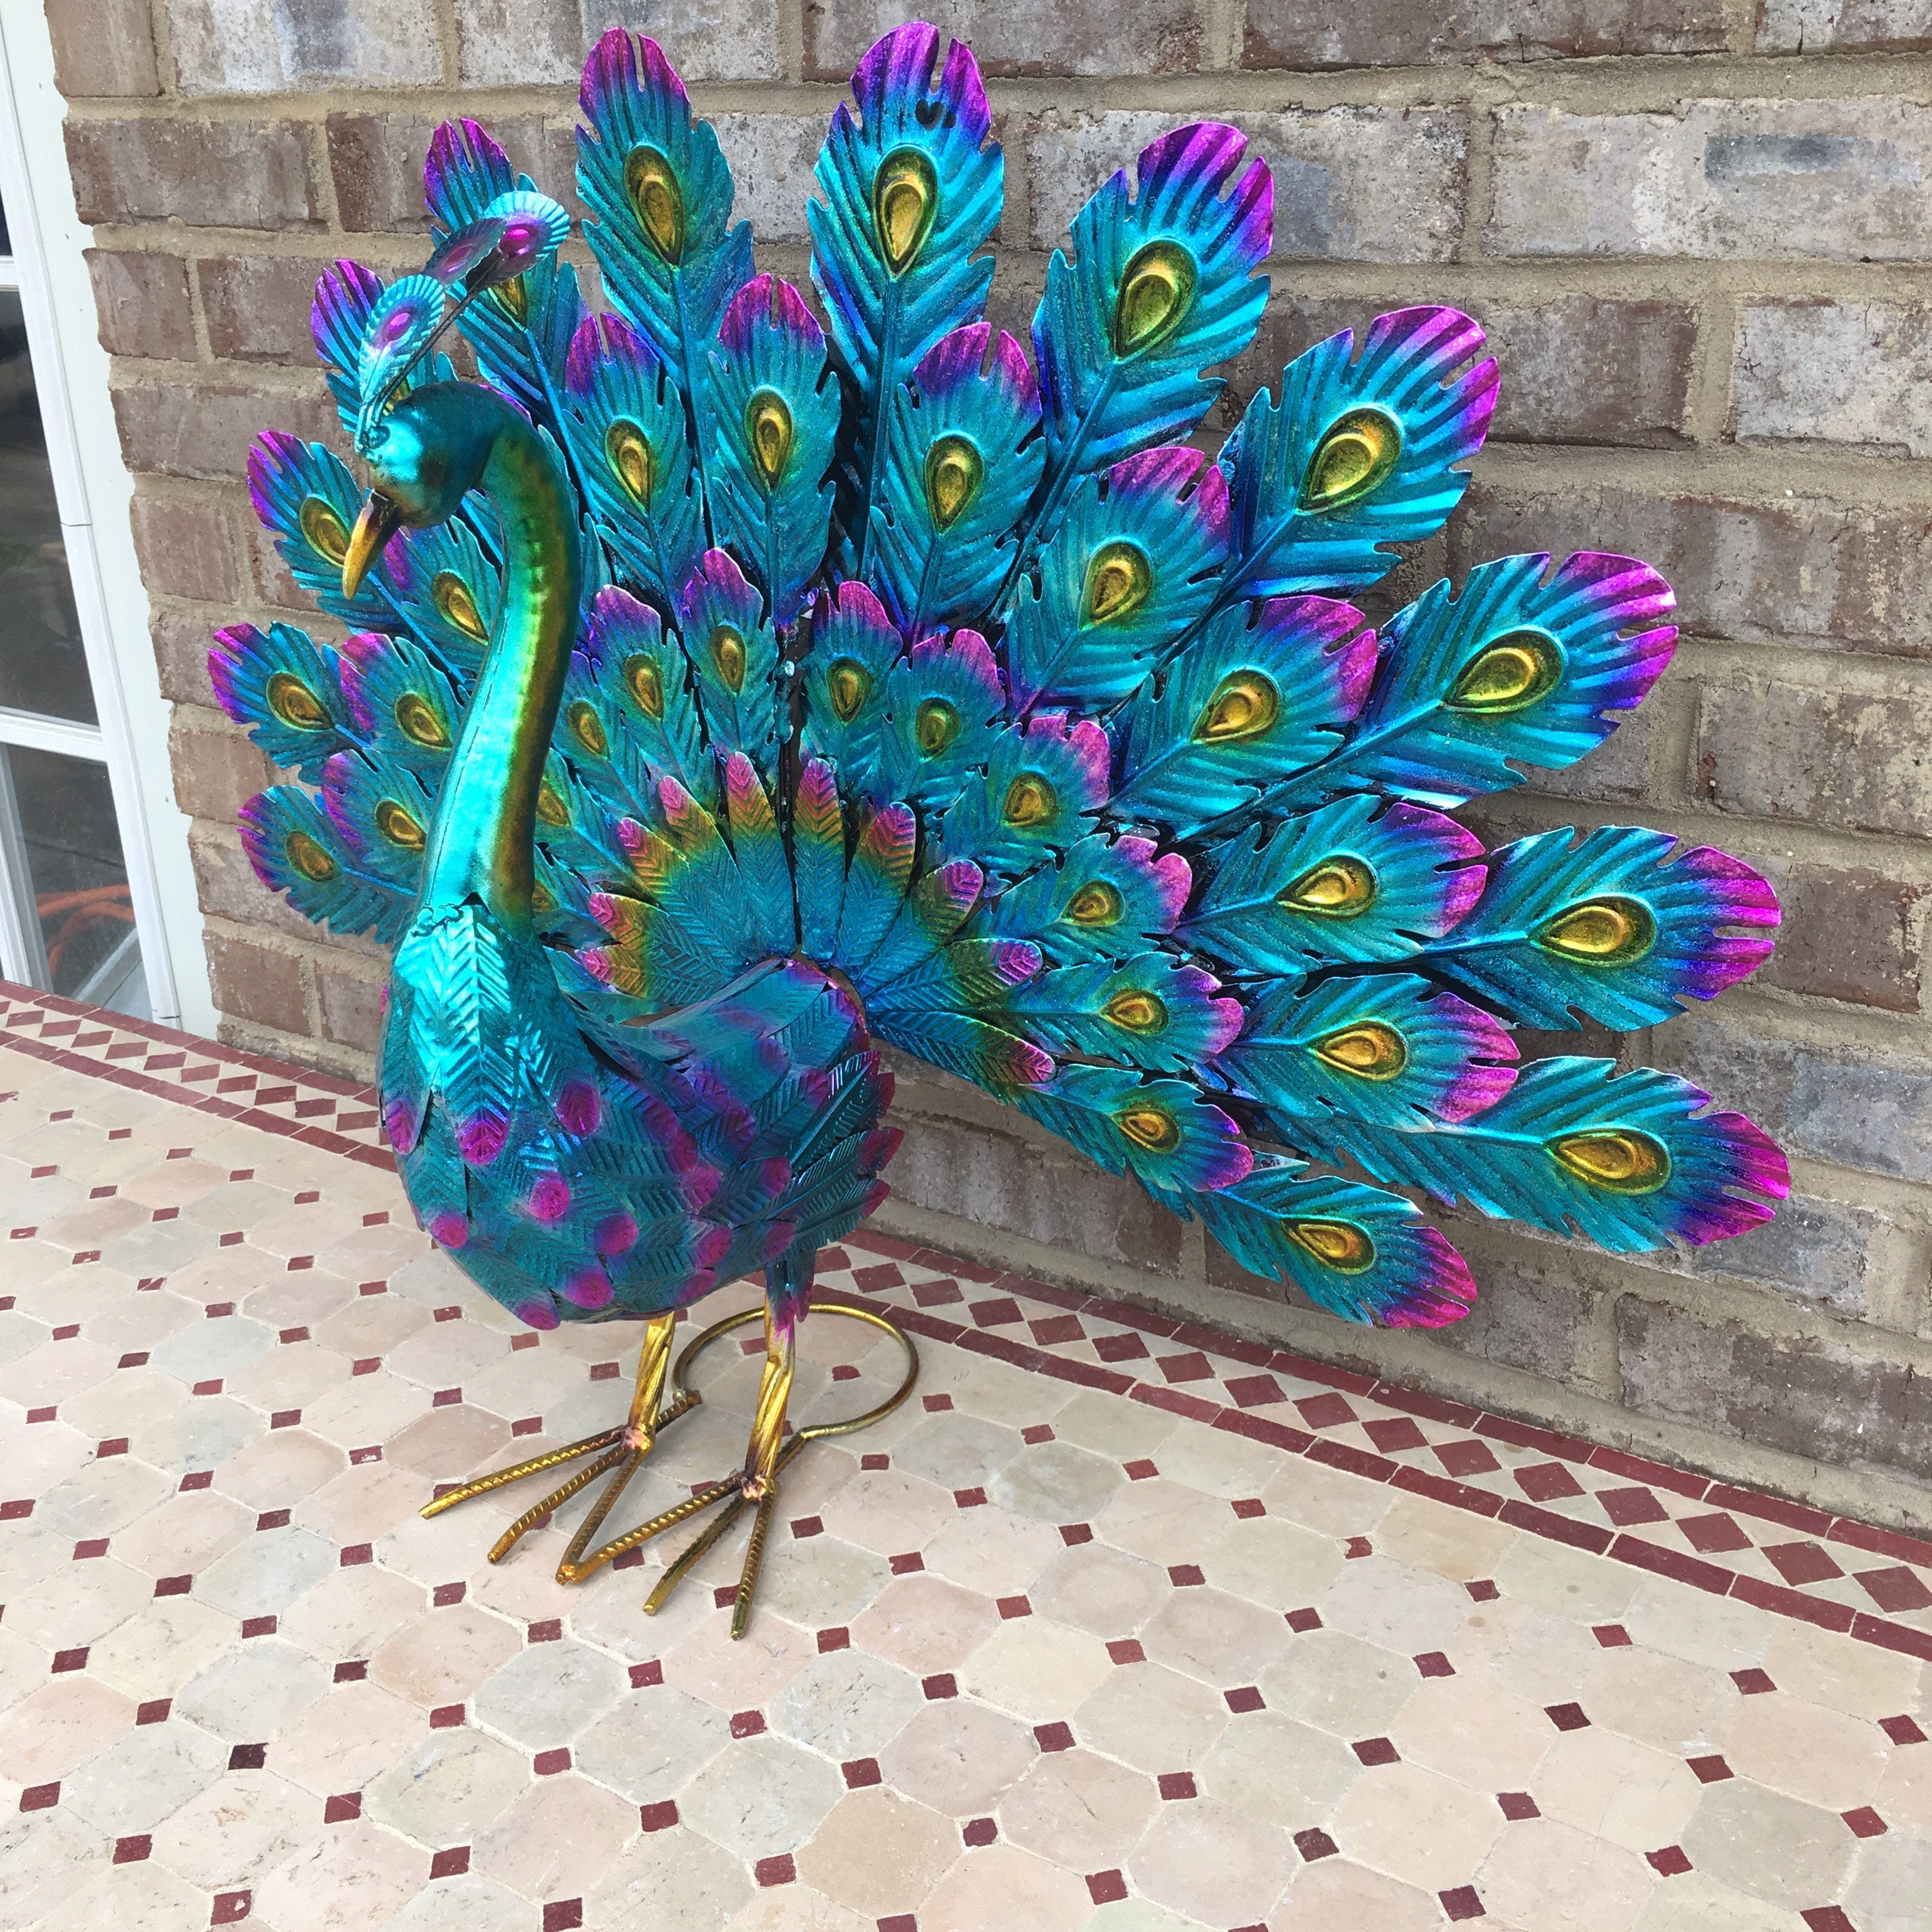 🎁Last Day Promotion- SAVE 70%🦚Beautiful Peacock Statue Decor-Buy 2 Free VIP Shipping